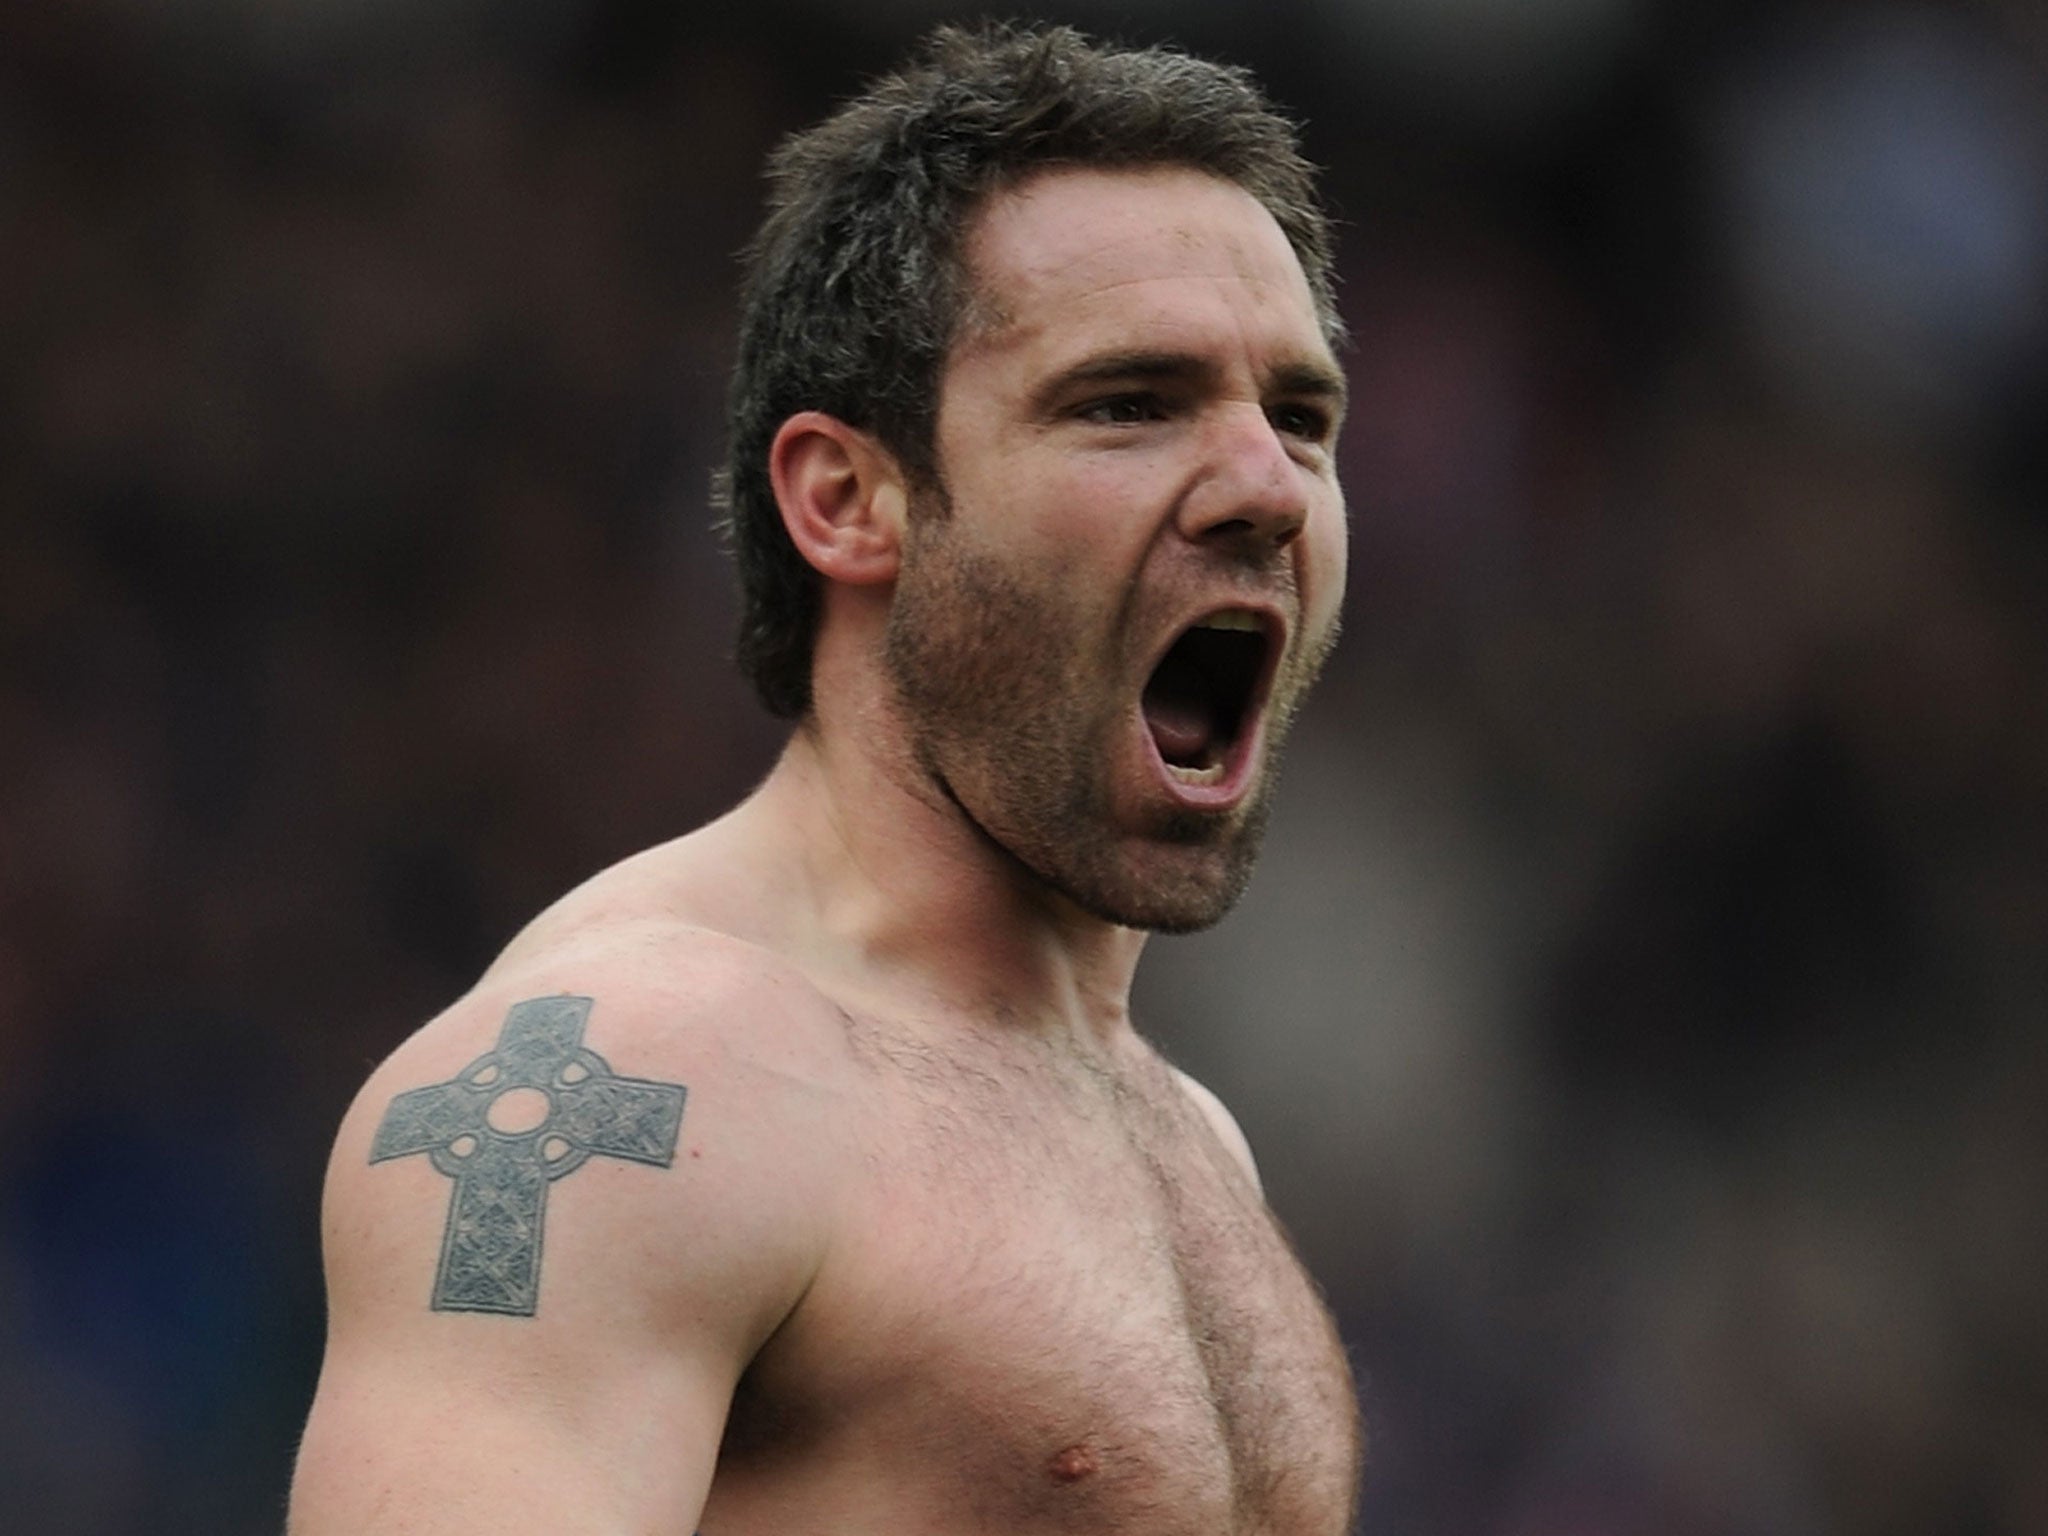 David Dunn: The midfielder’s equaliser for Blackburn came five minutes into stoppage time